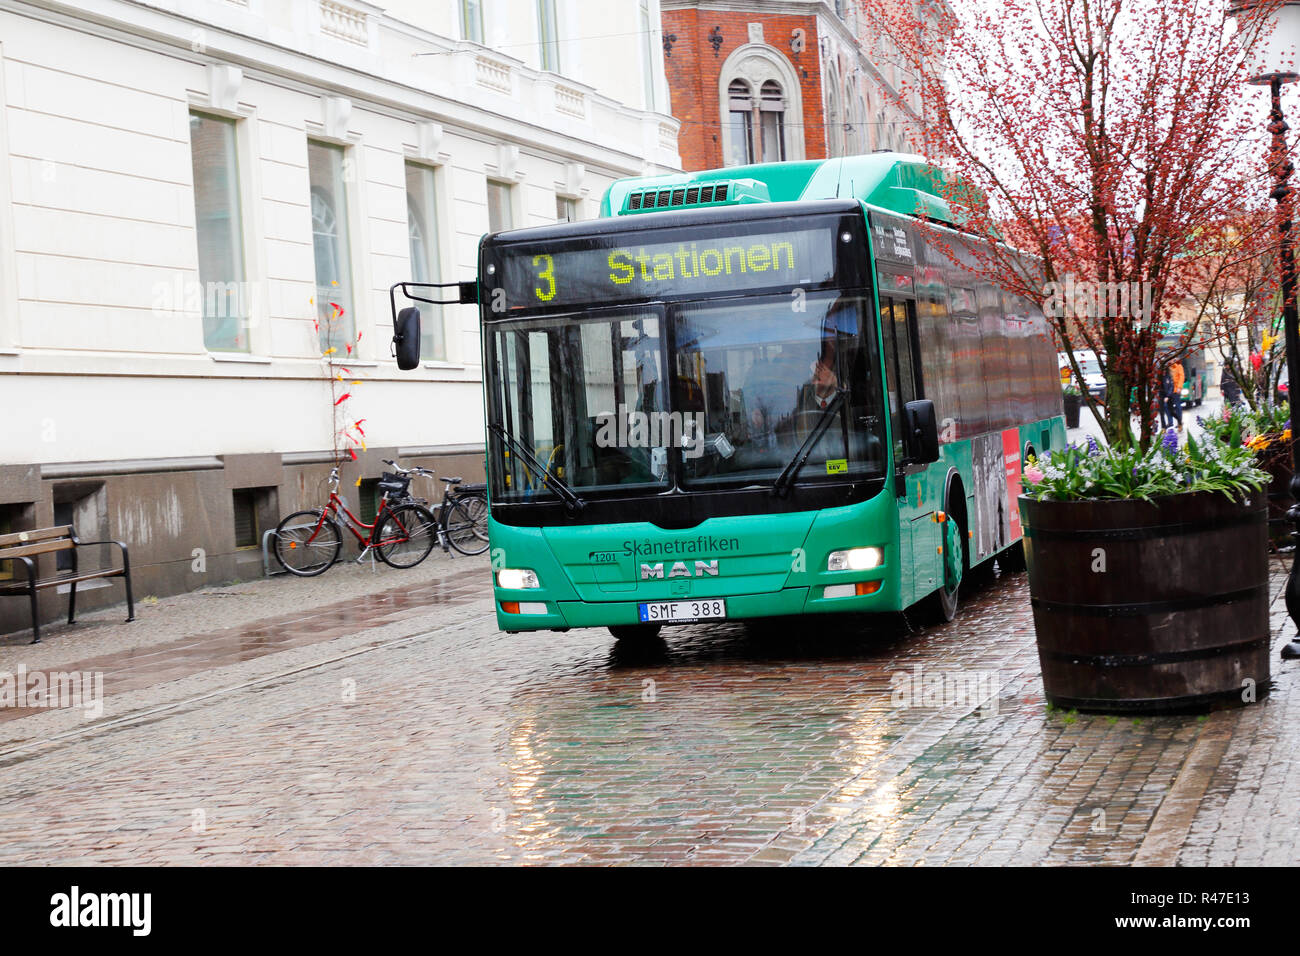 Ystad, Sweden - April 15, 2017: One green city bus operating public transportation line 3 for the Skanetrafiken at the Hamngatan street in the city ce Stock Photo